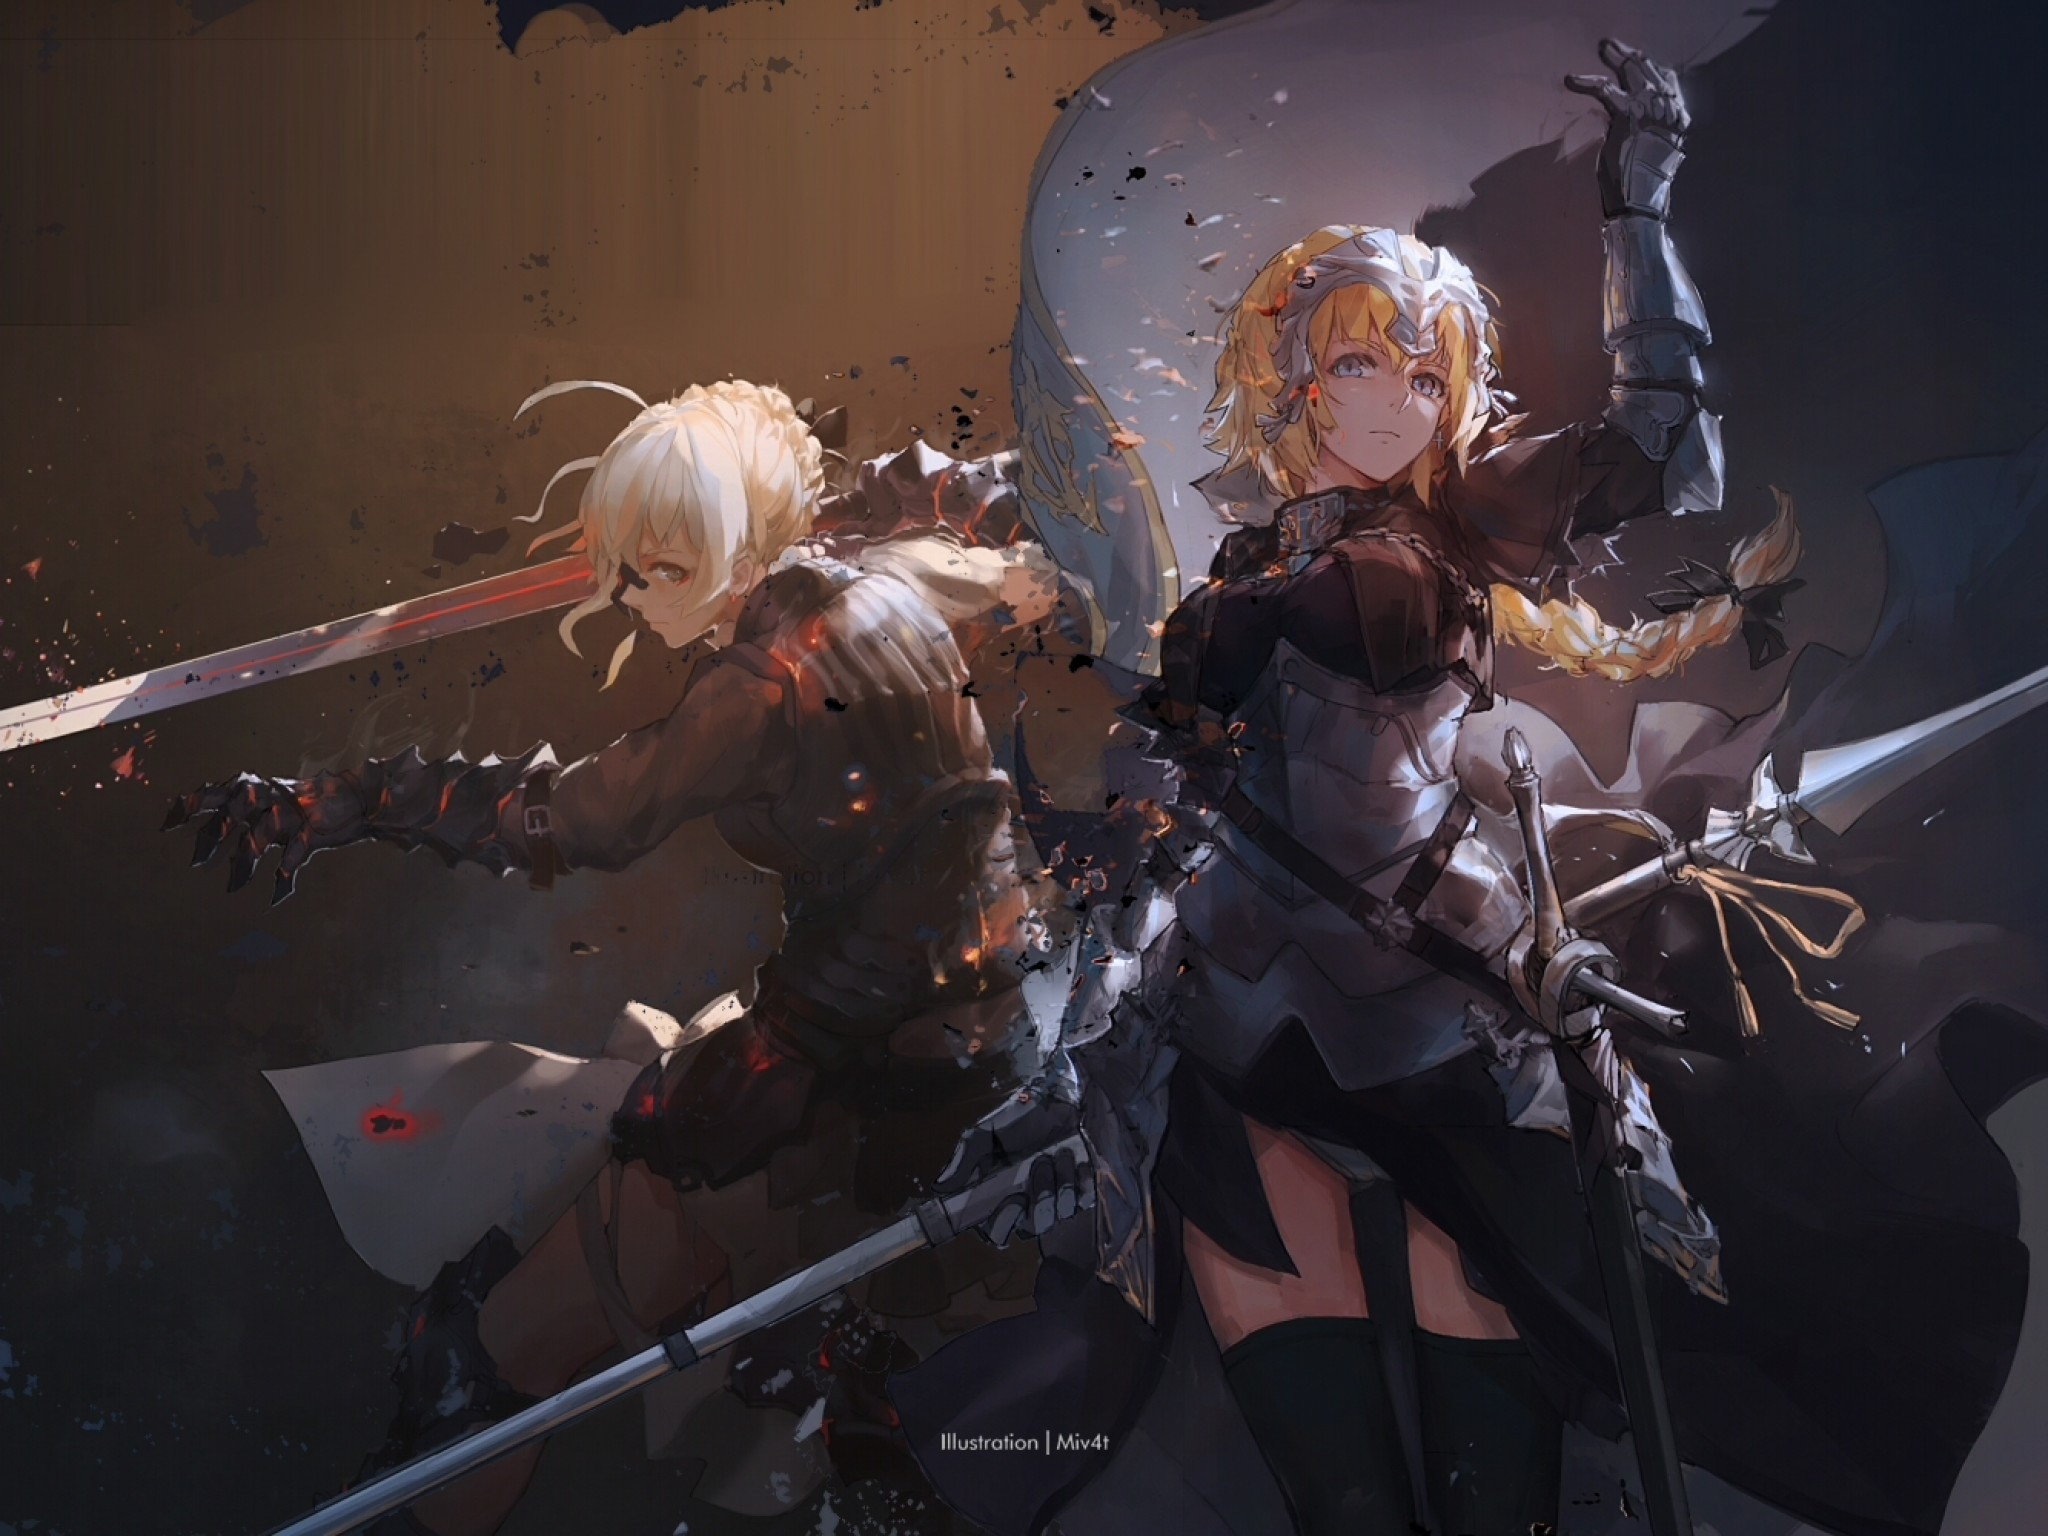 Download 2048x1536 Fate Stay Night, Saber, Armored, Ruler, Fate Apocrypha, Fate...